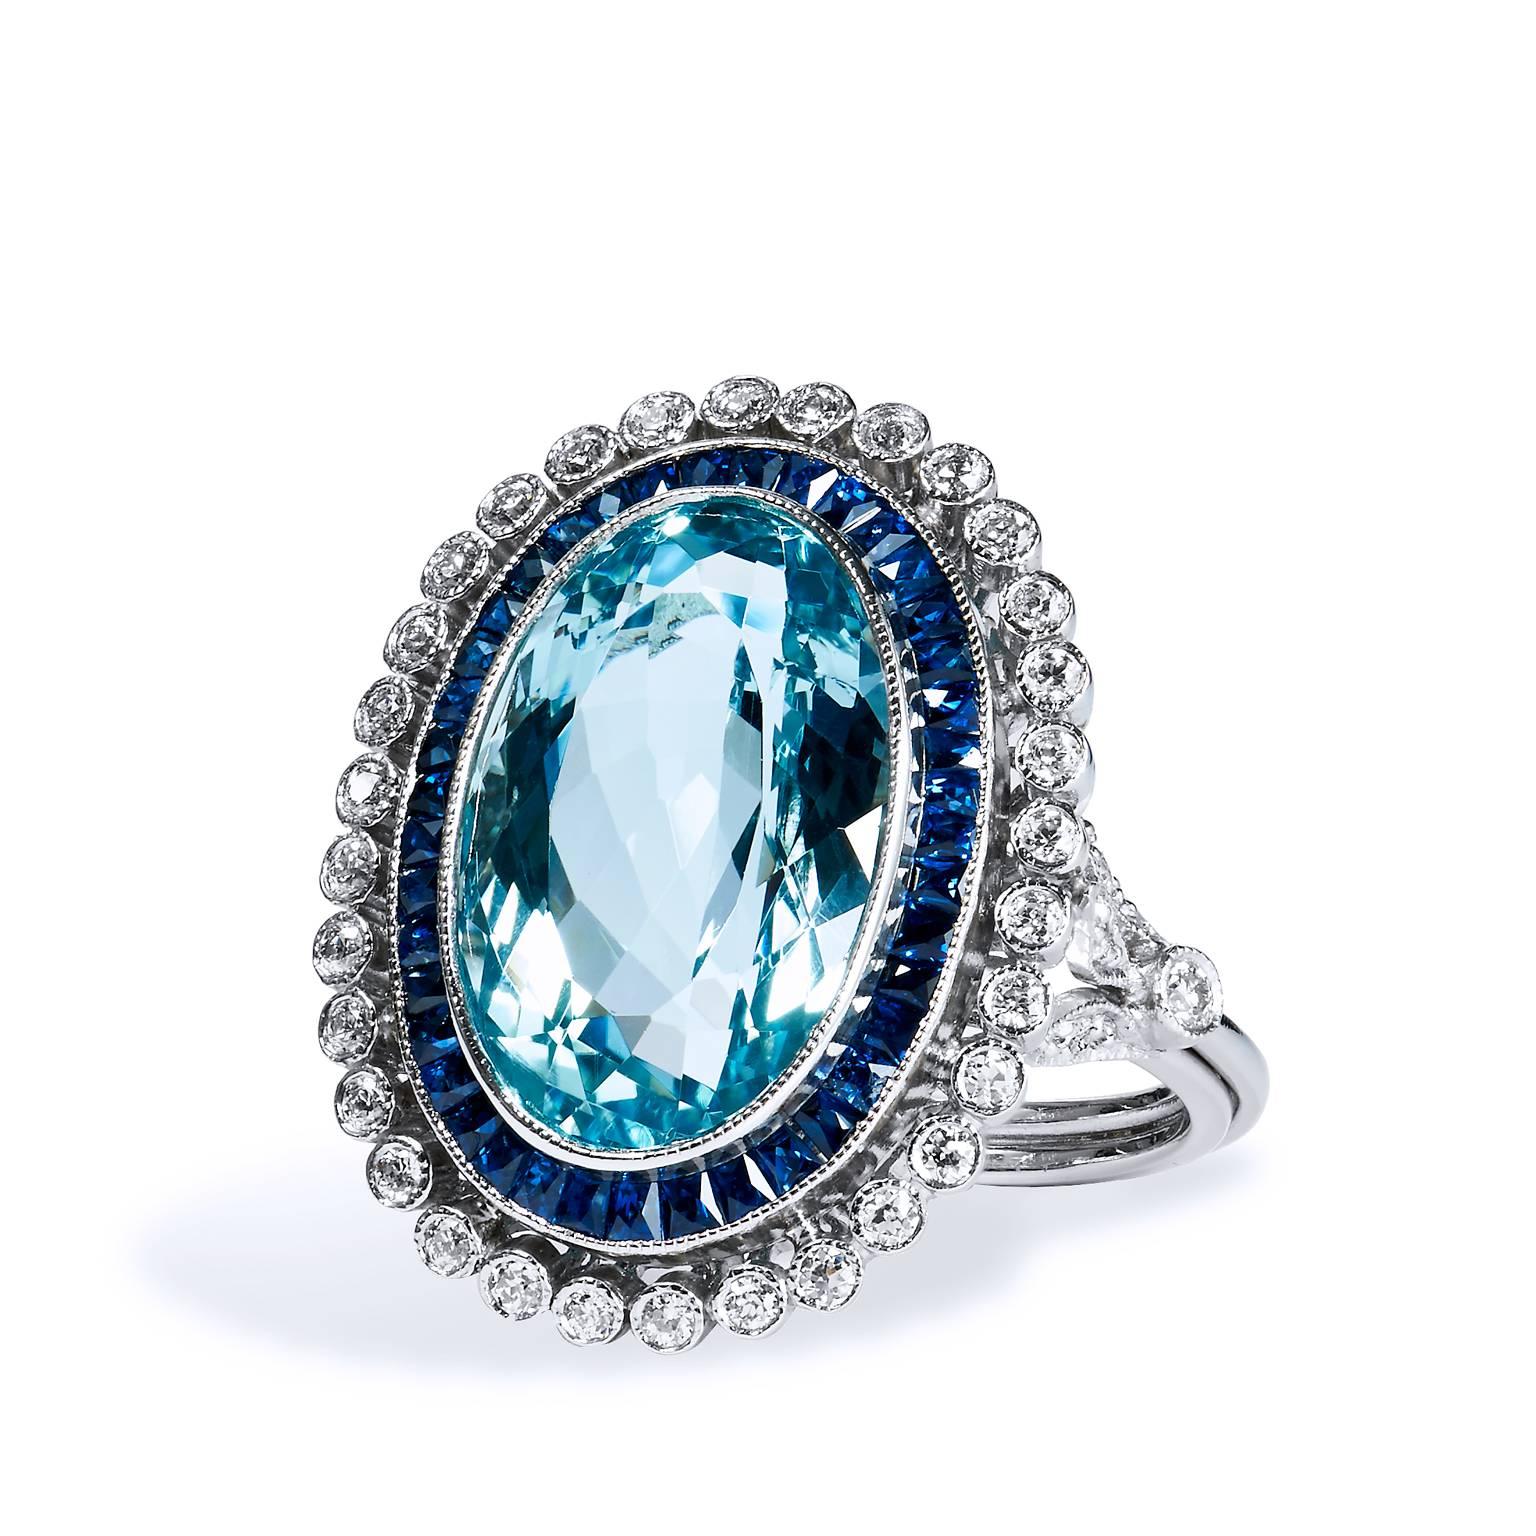 This Art Deco Inspired 10.54 Carat Aquamarine & Diamond Platinum Cocktail Ring 7.25 has a GIA Certification.

The birth stone of March, the Aquamarine is one of the most lustrous gemstones for its sea toned hues. Although loved for its glass-like